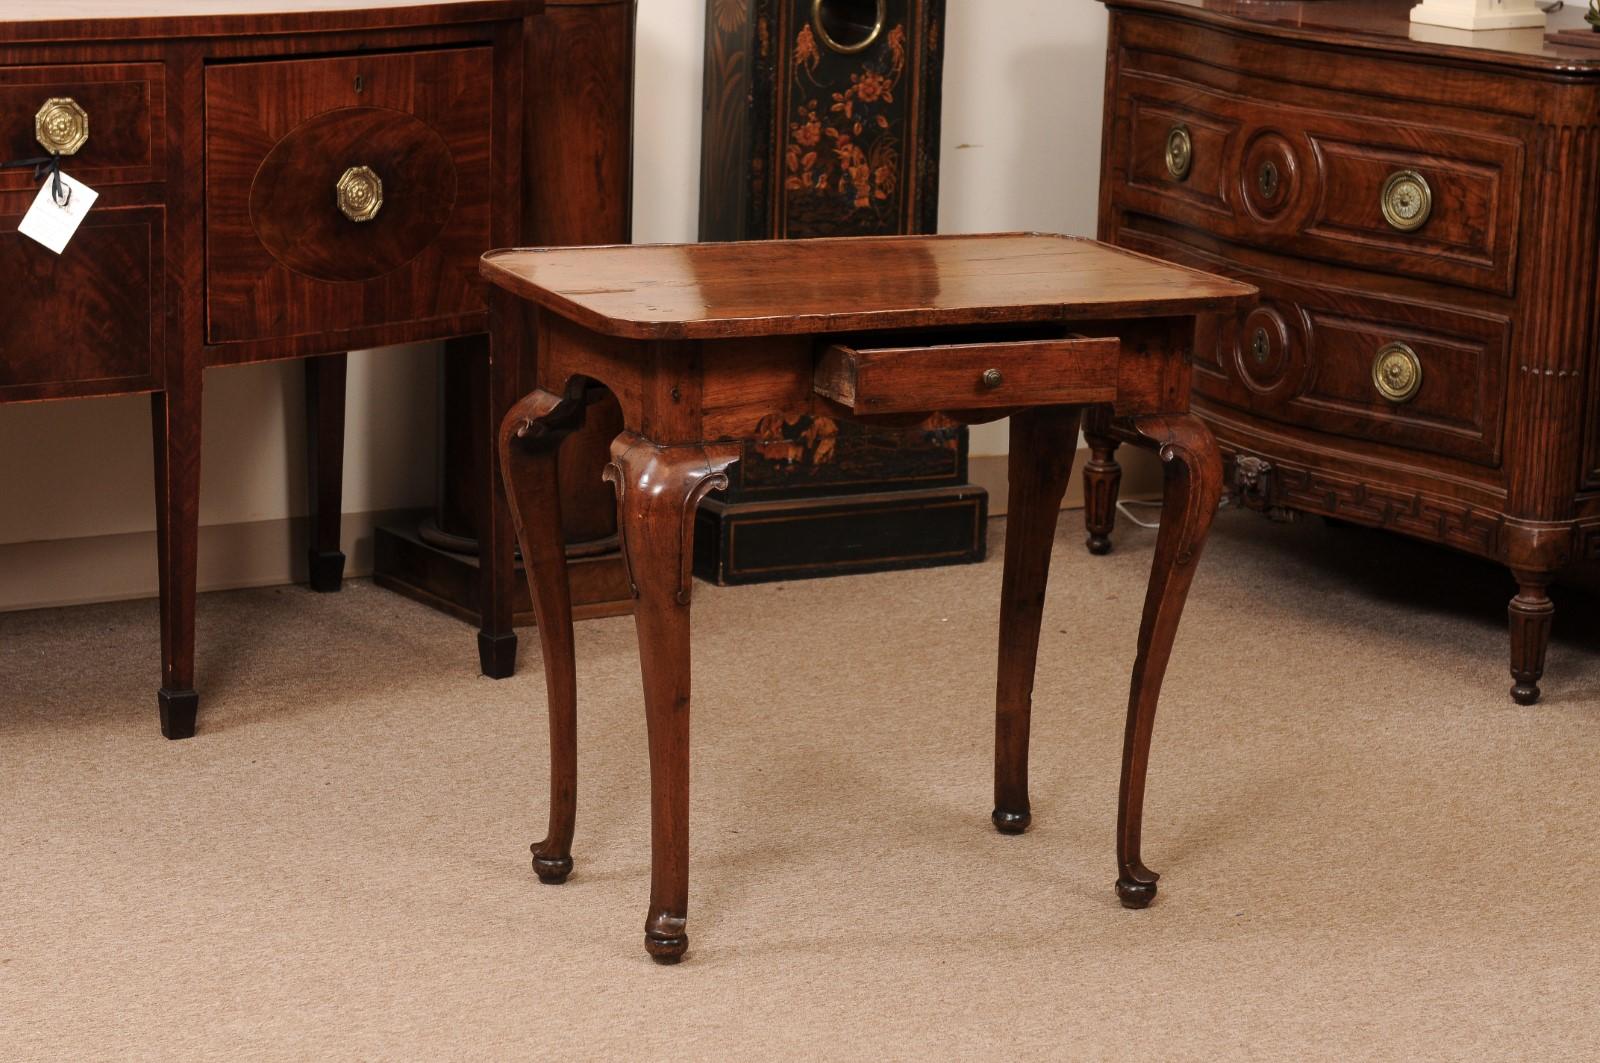 Early 18th Century Italian Walnut Side Table with Tray Top, Drawer, Cabriole Leg In Fair Condition For Sale In Atlanta, GA